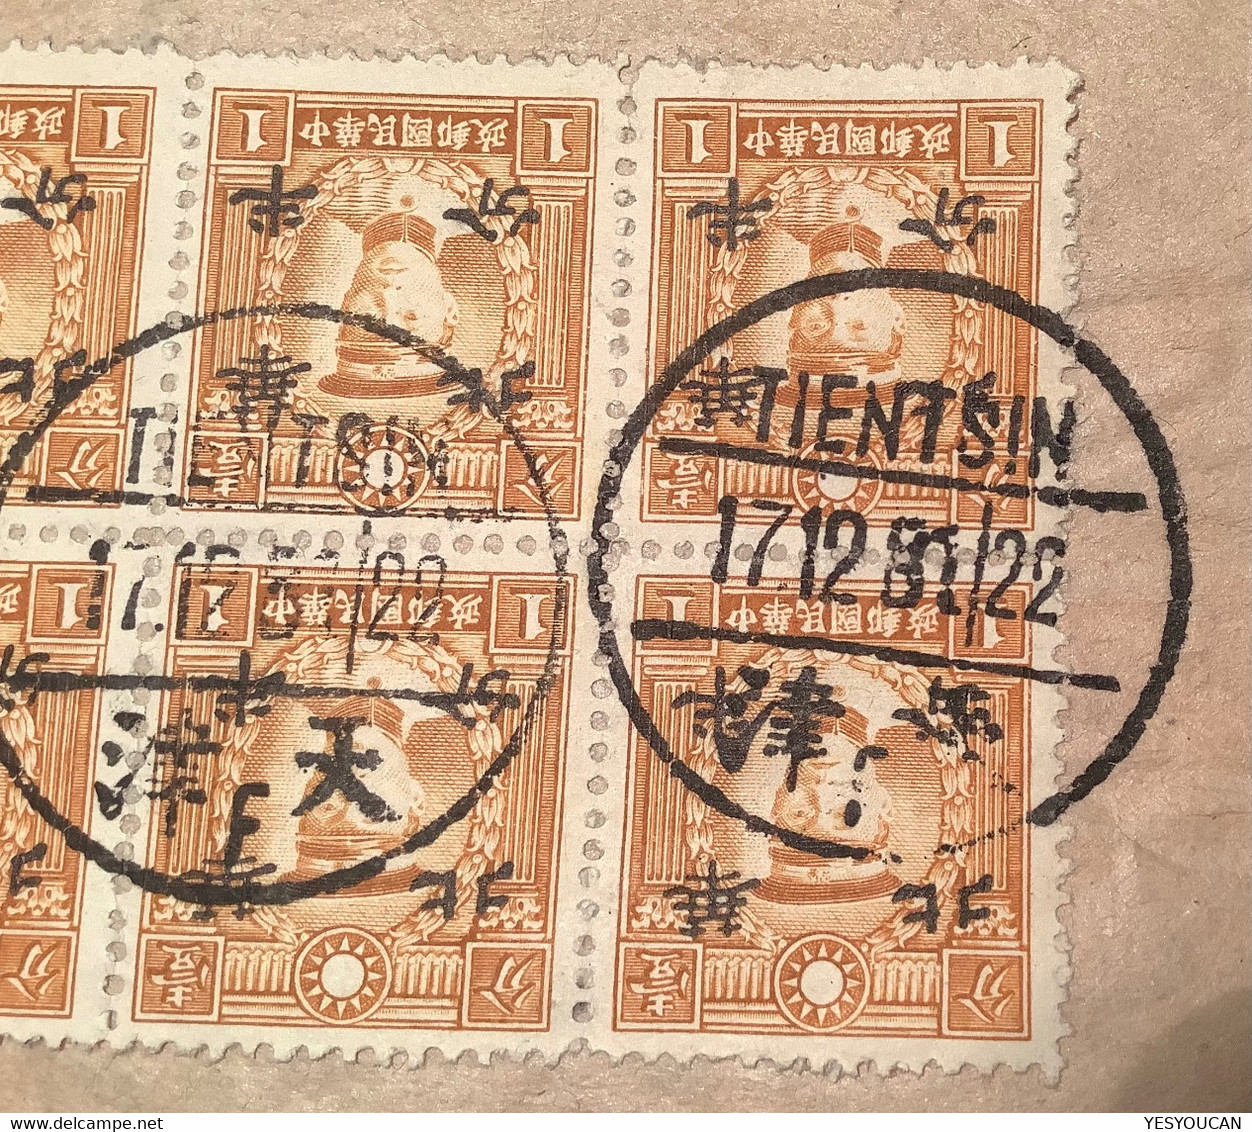 Japanese Occupation North China 1942 “TIENTSIN” Rare Cover(Chine Lettre Guerre Japan War WW2 Martyrs - 1941-45 Northern China